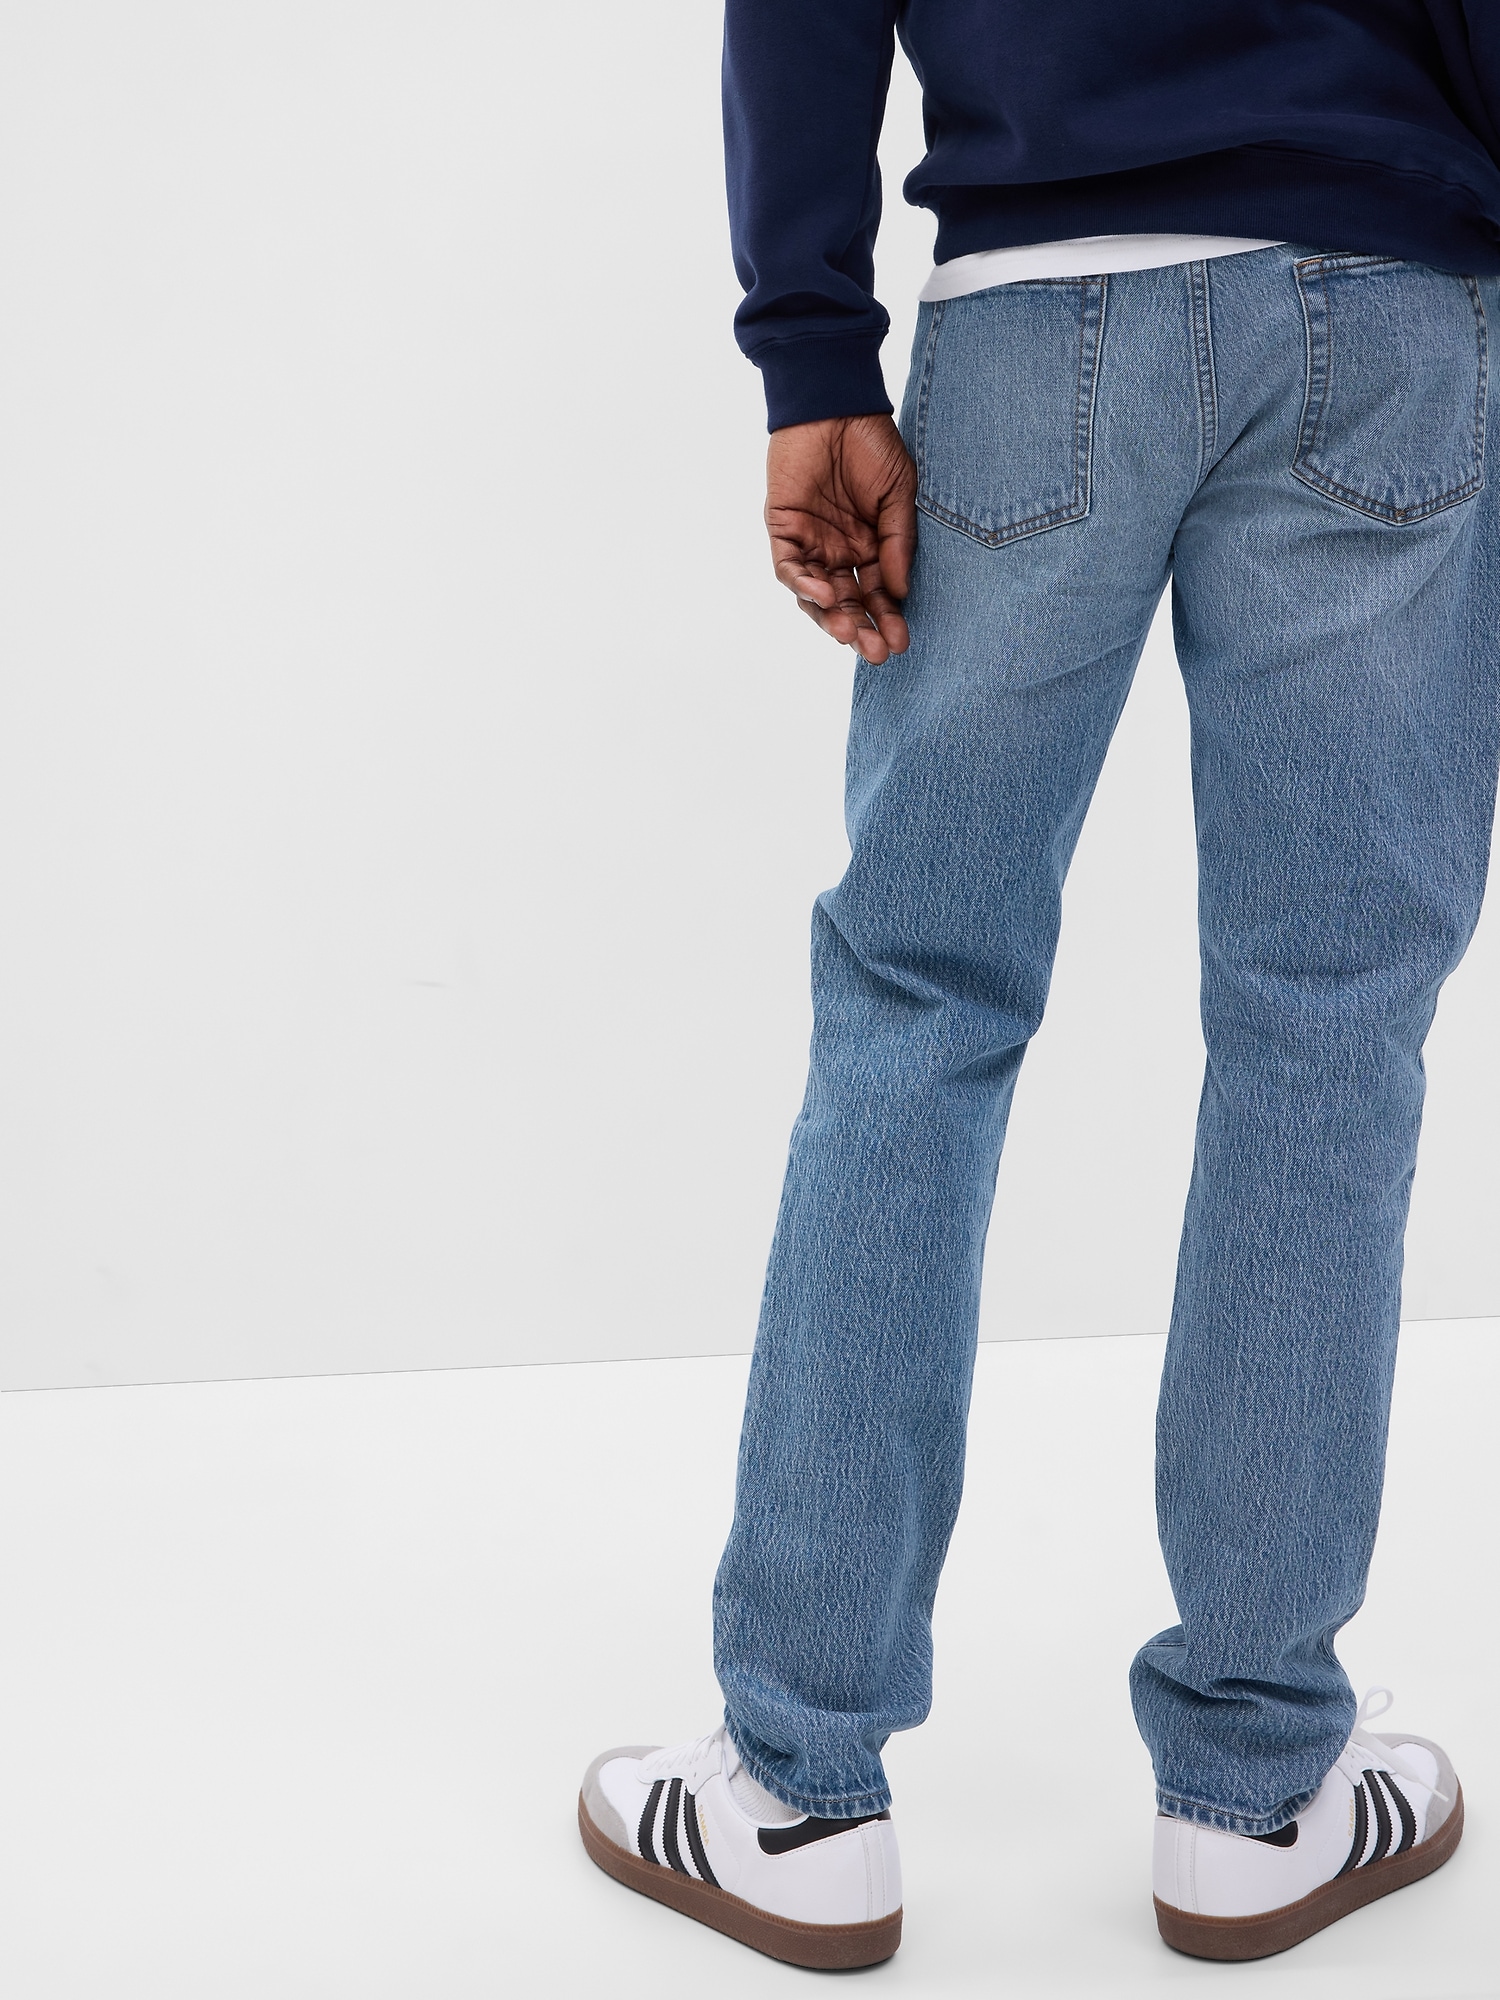 GAP Mens Soft Wear Skinny Fit Jeans, Resin Rinse 063, 30W x 30L US at   Men's Clothing store